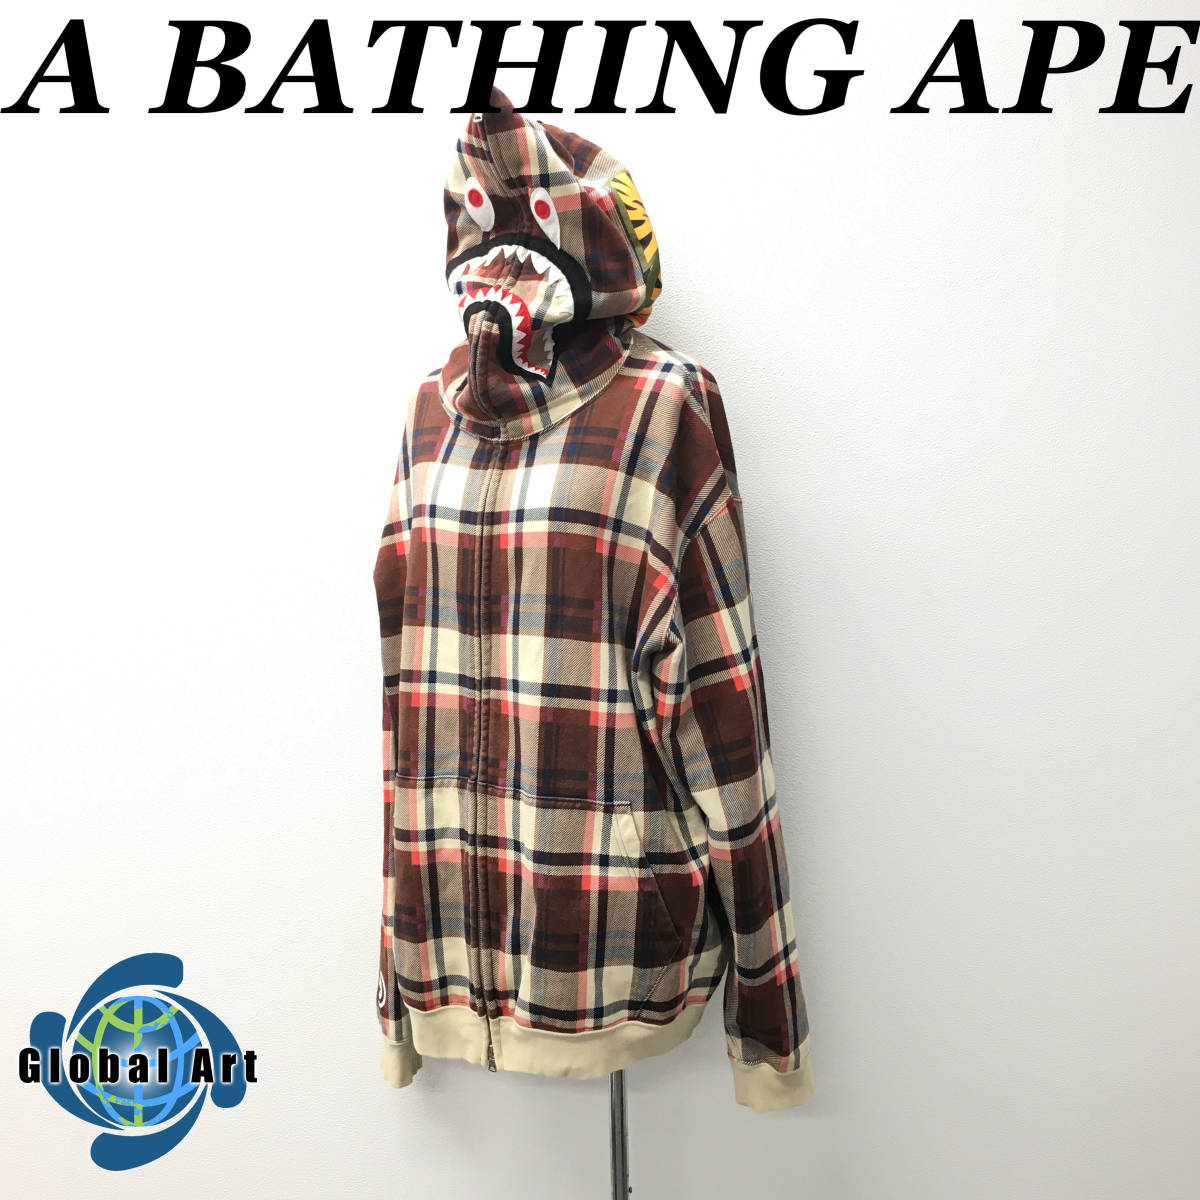 ☆C09355⁄A BATHING APE アベイシングエイプ⁄シャークパーカー⁄サイズ L⁄ラブジェネチェック⁄コットン100% product  details | Yahoo! Auctions Japan proxy bidding and shopping service | FROM  JAPAN